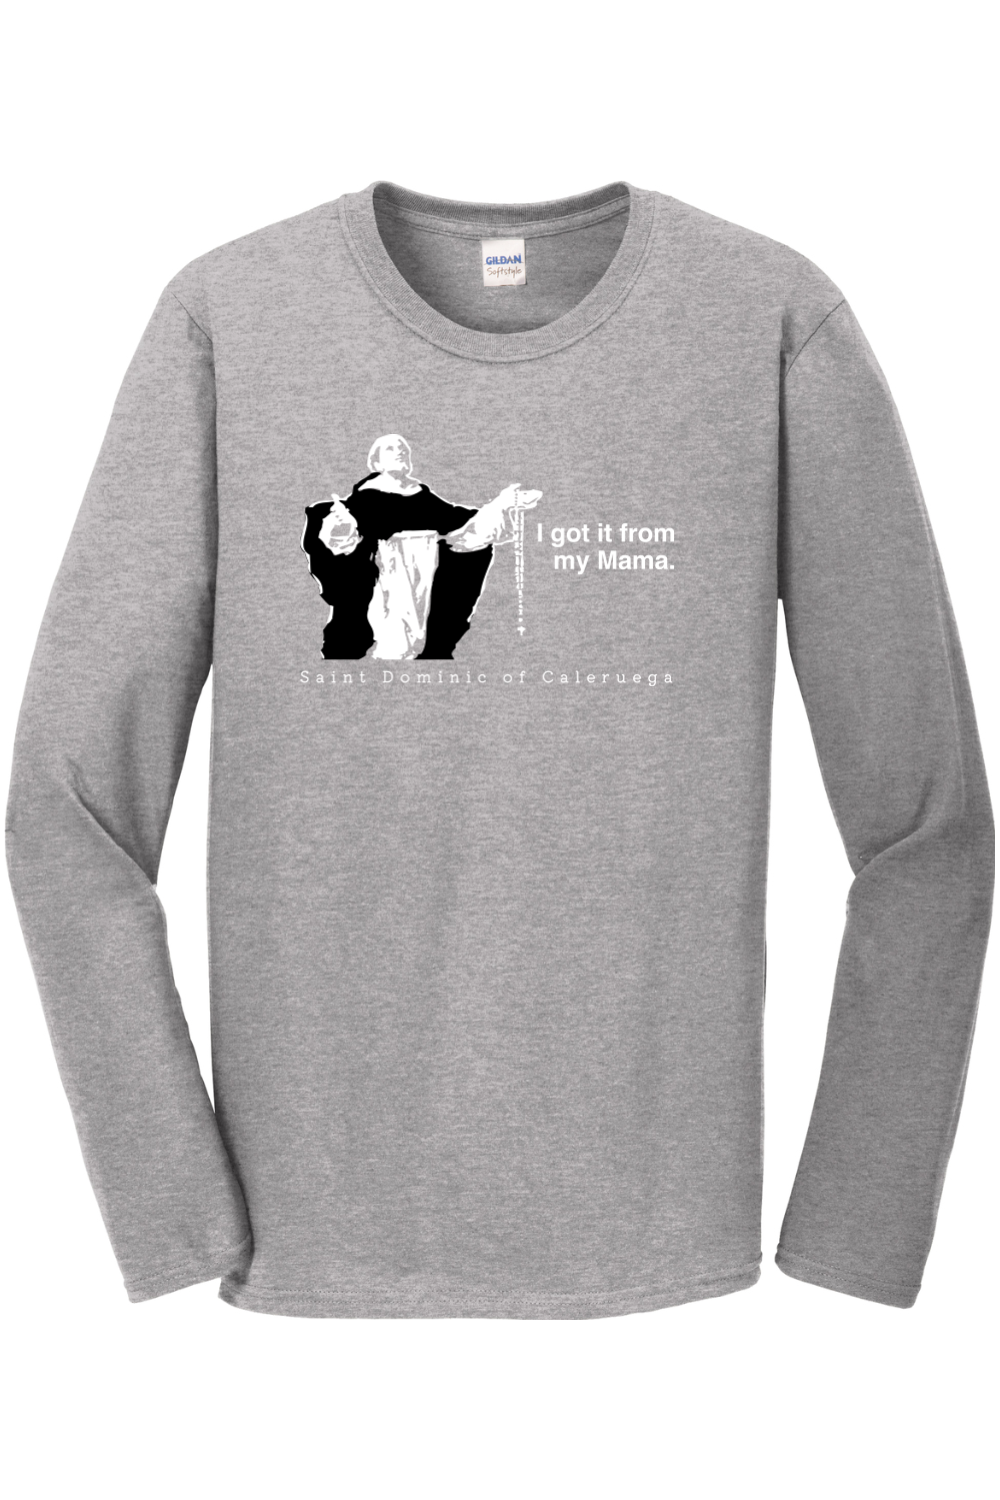 I Got It From My Mama - St. Dominic Long Sleeve